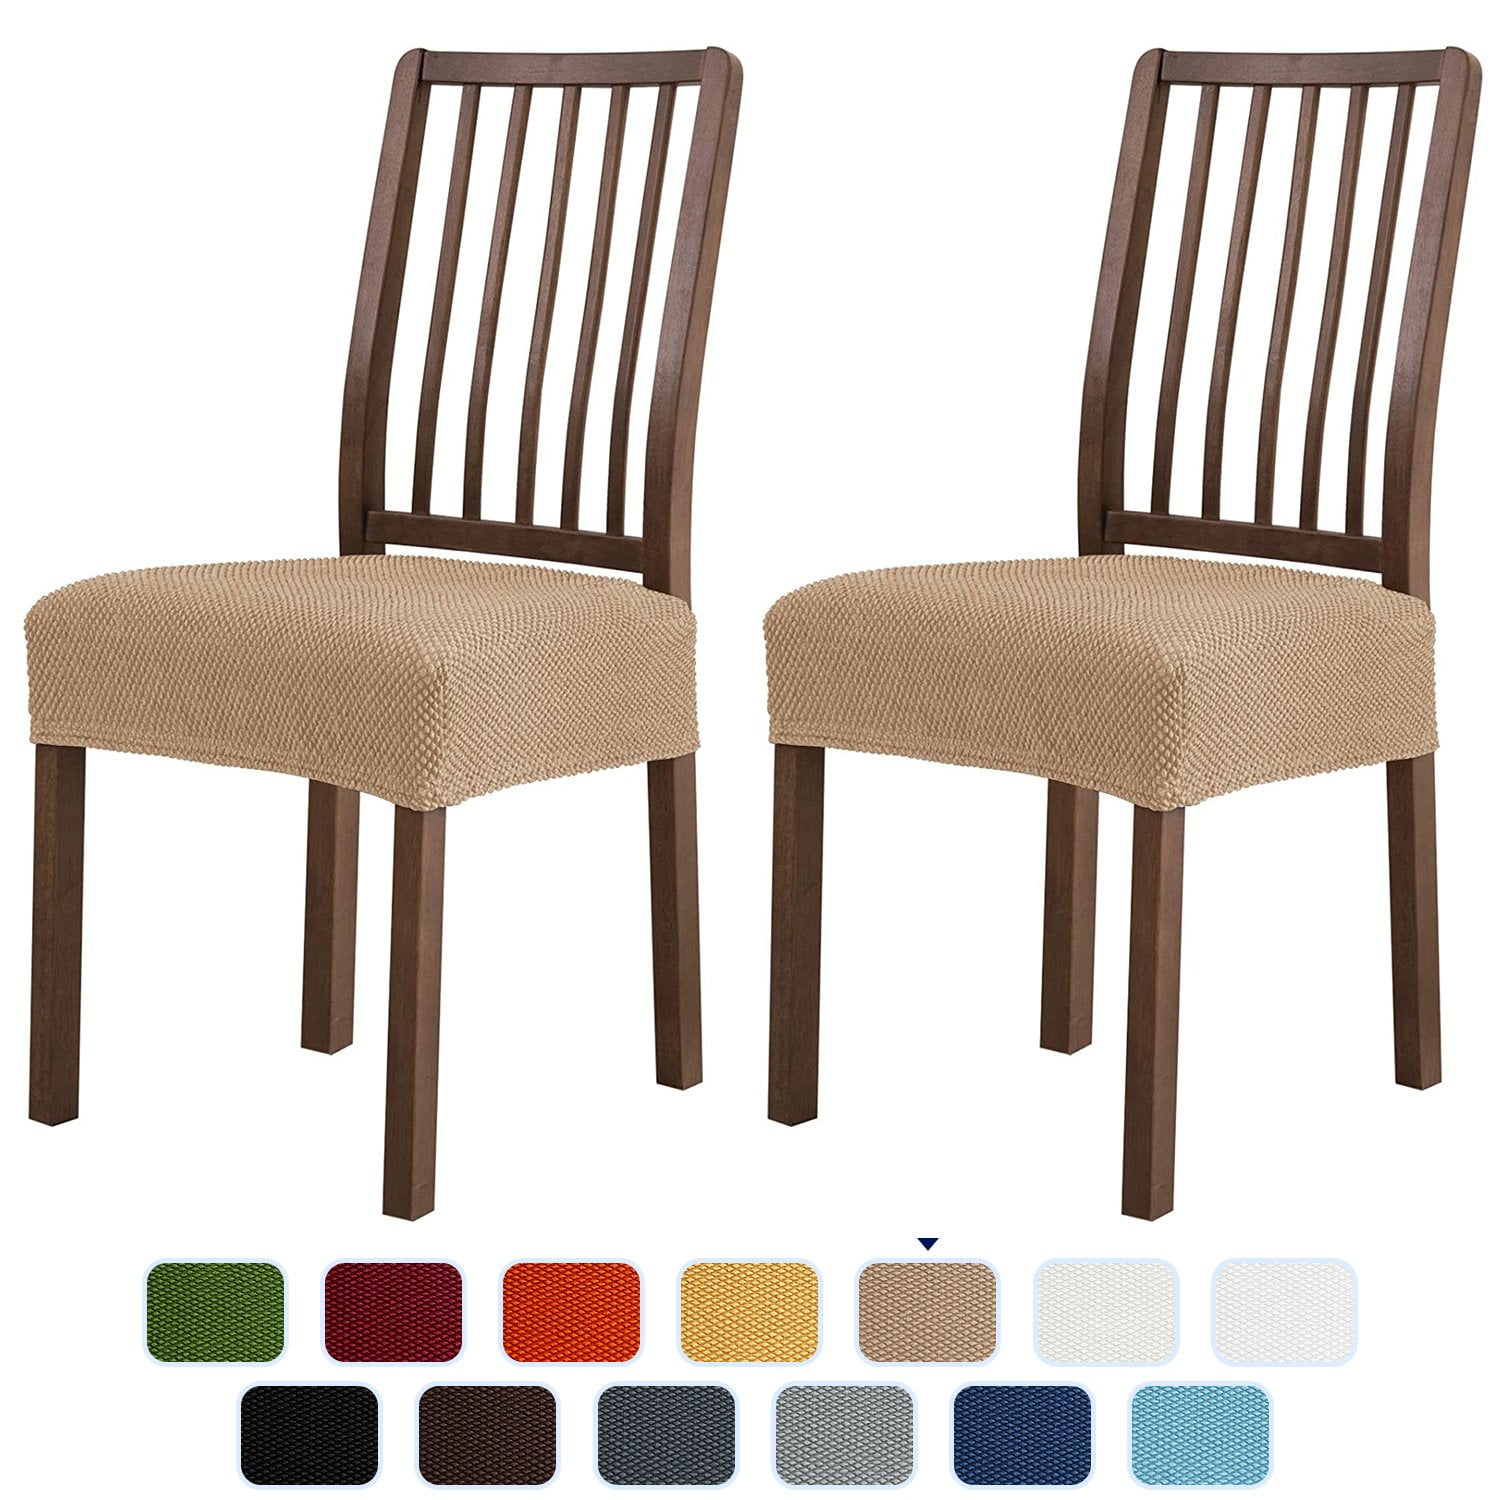 Universal Jacquard Dining Room Chair Slipcover Sets Seat Cover Stretch Protector 